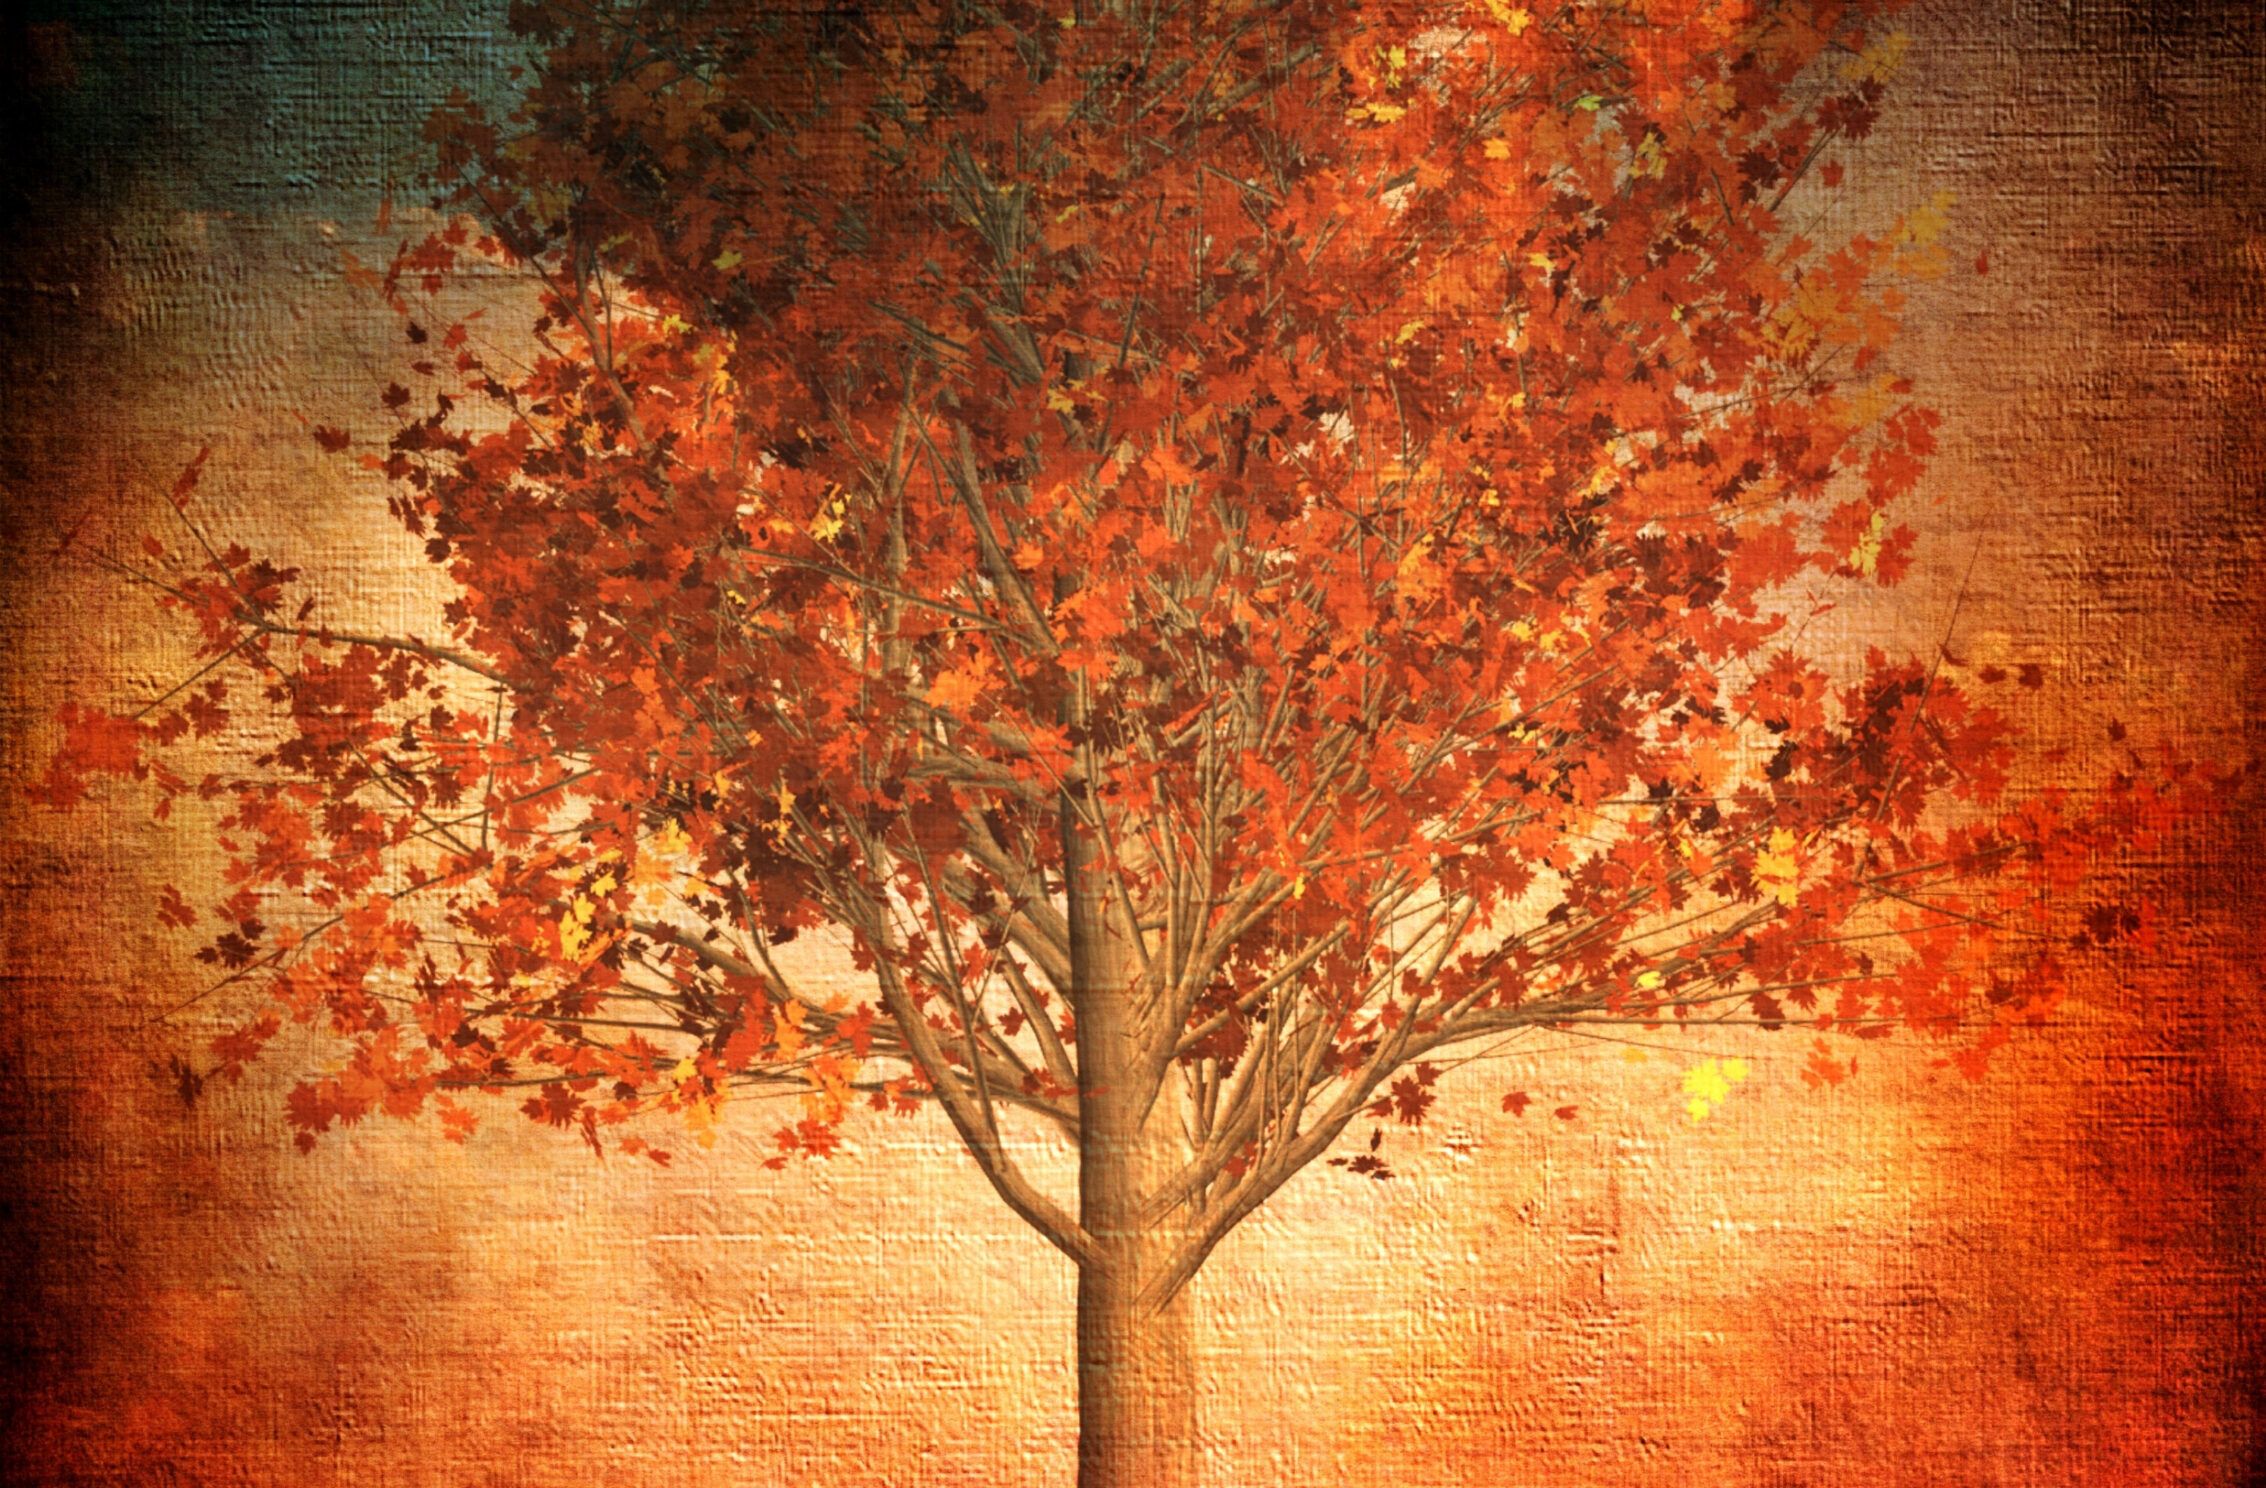 A tree with orange leaves in front of a textured background. - Nature